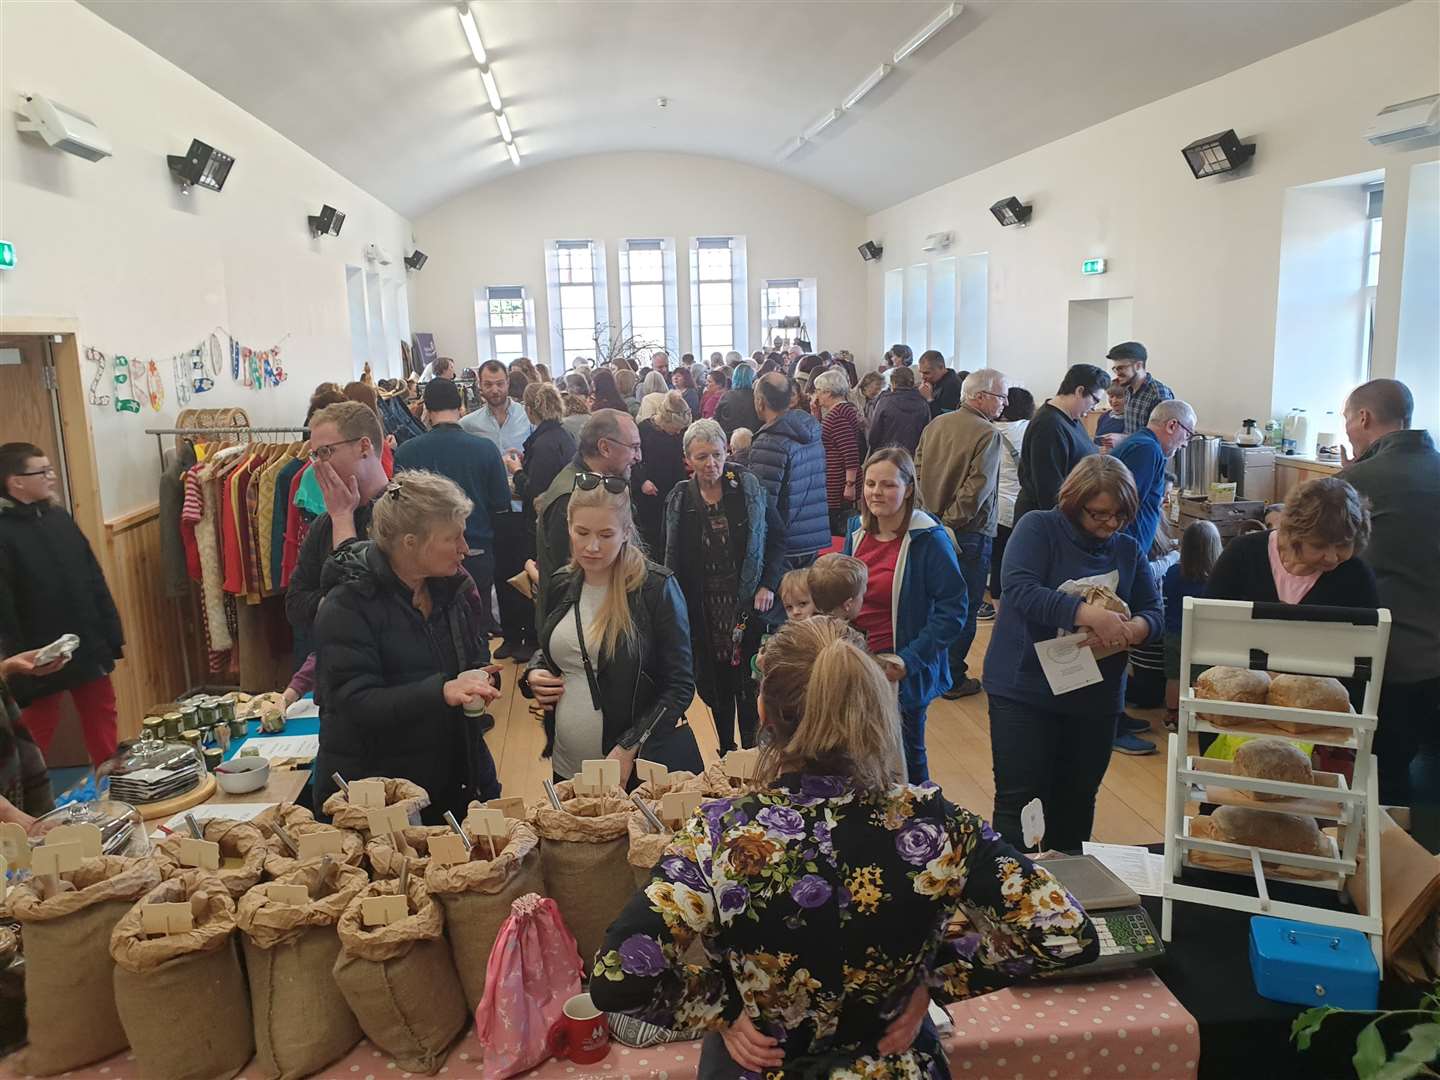 Muir of Ord Vilage Hall was packed for the first Moon Market.